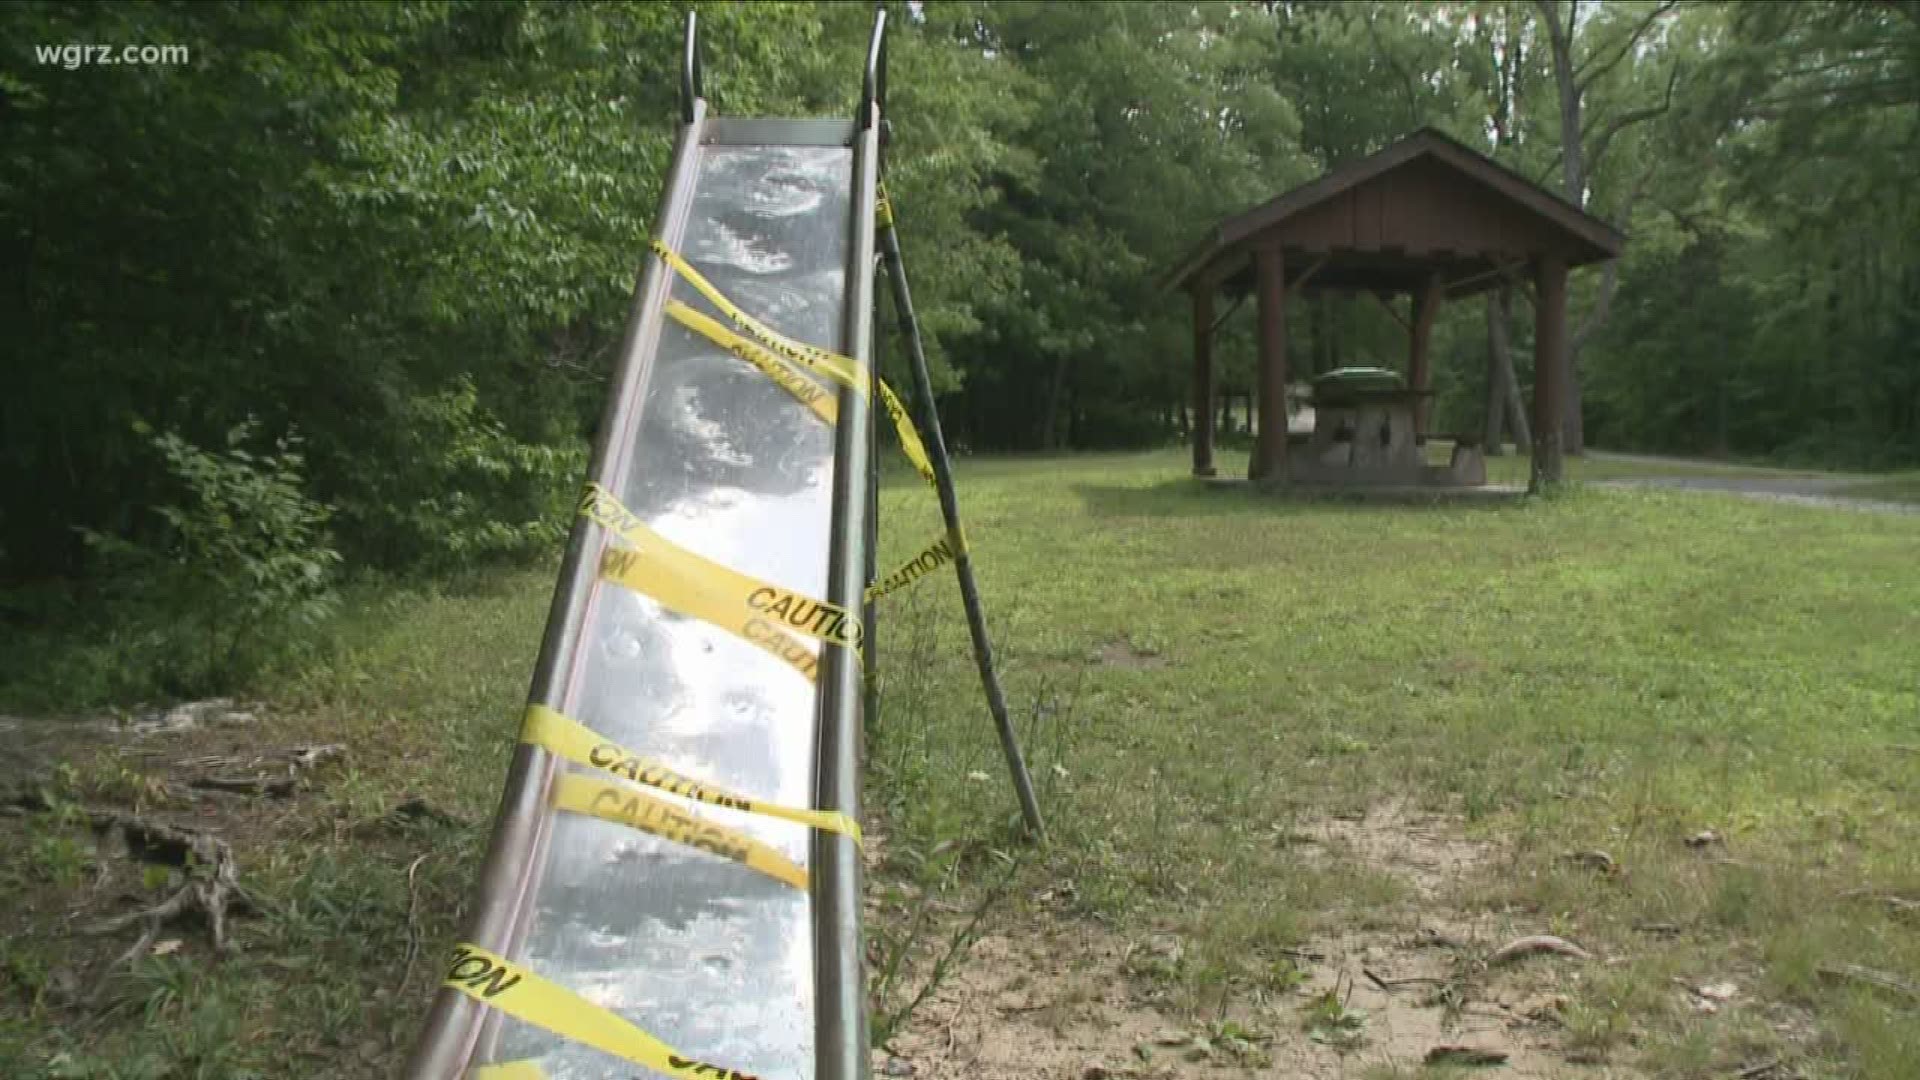 Erie Co. parks identifies 66 structures with lead